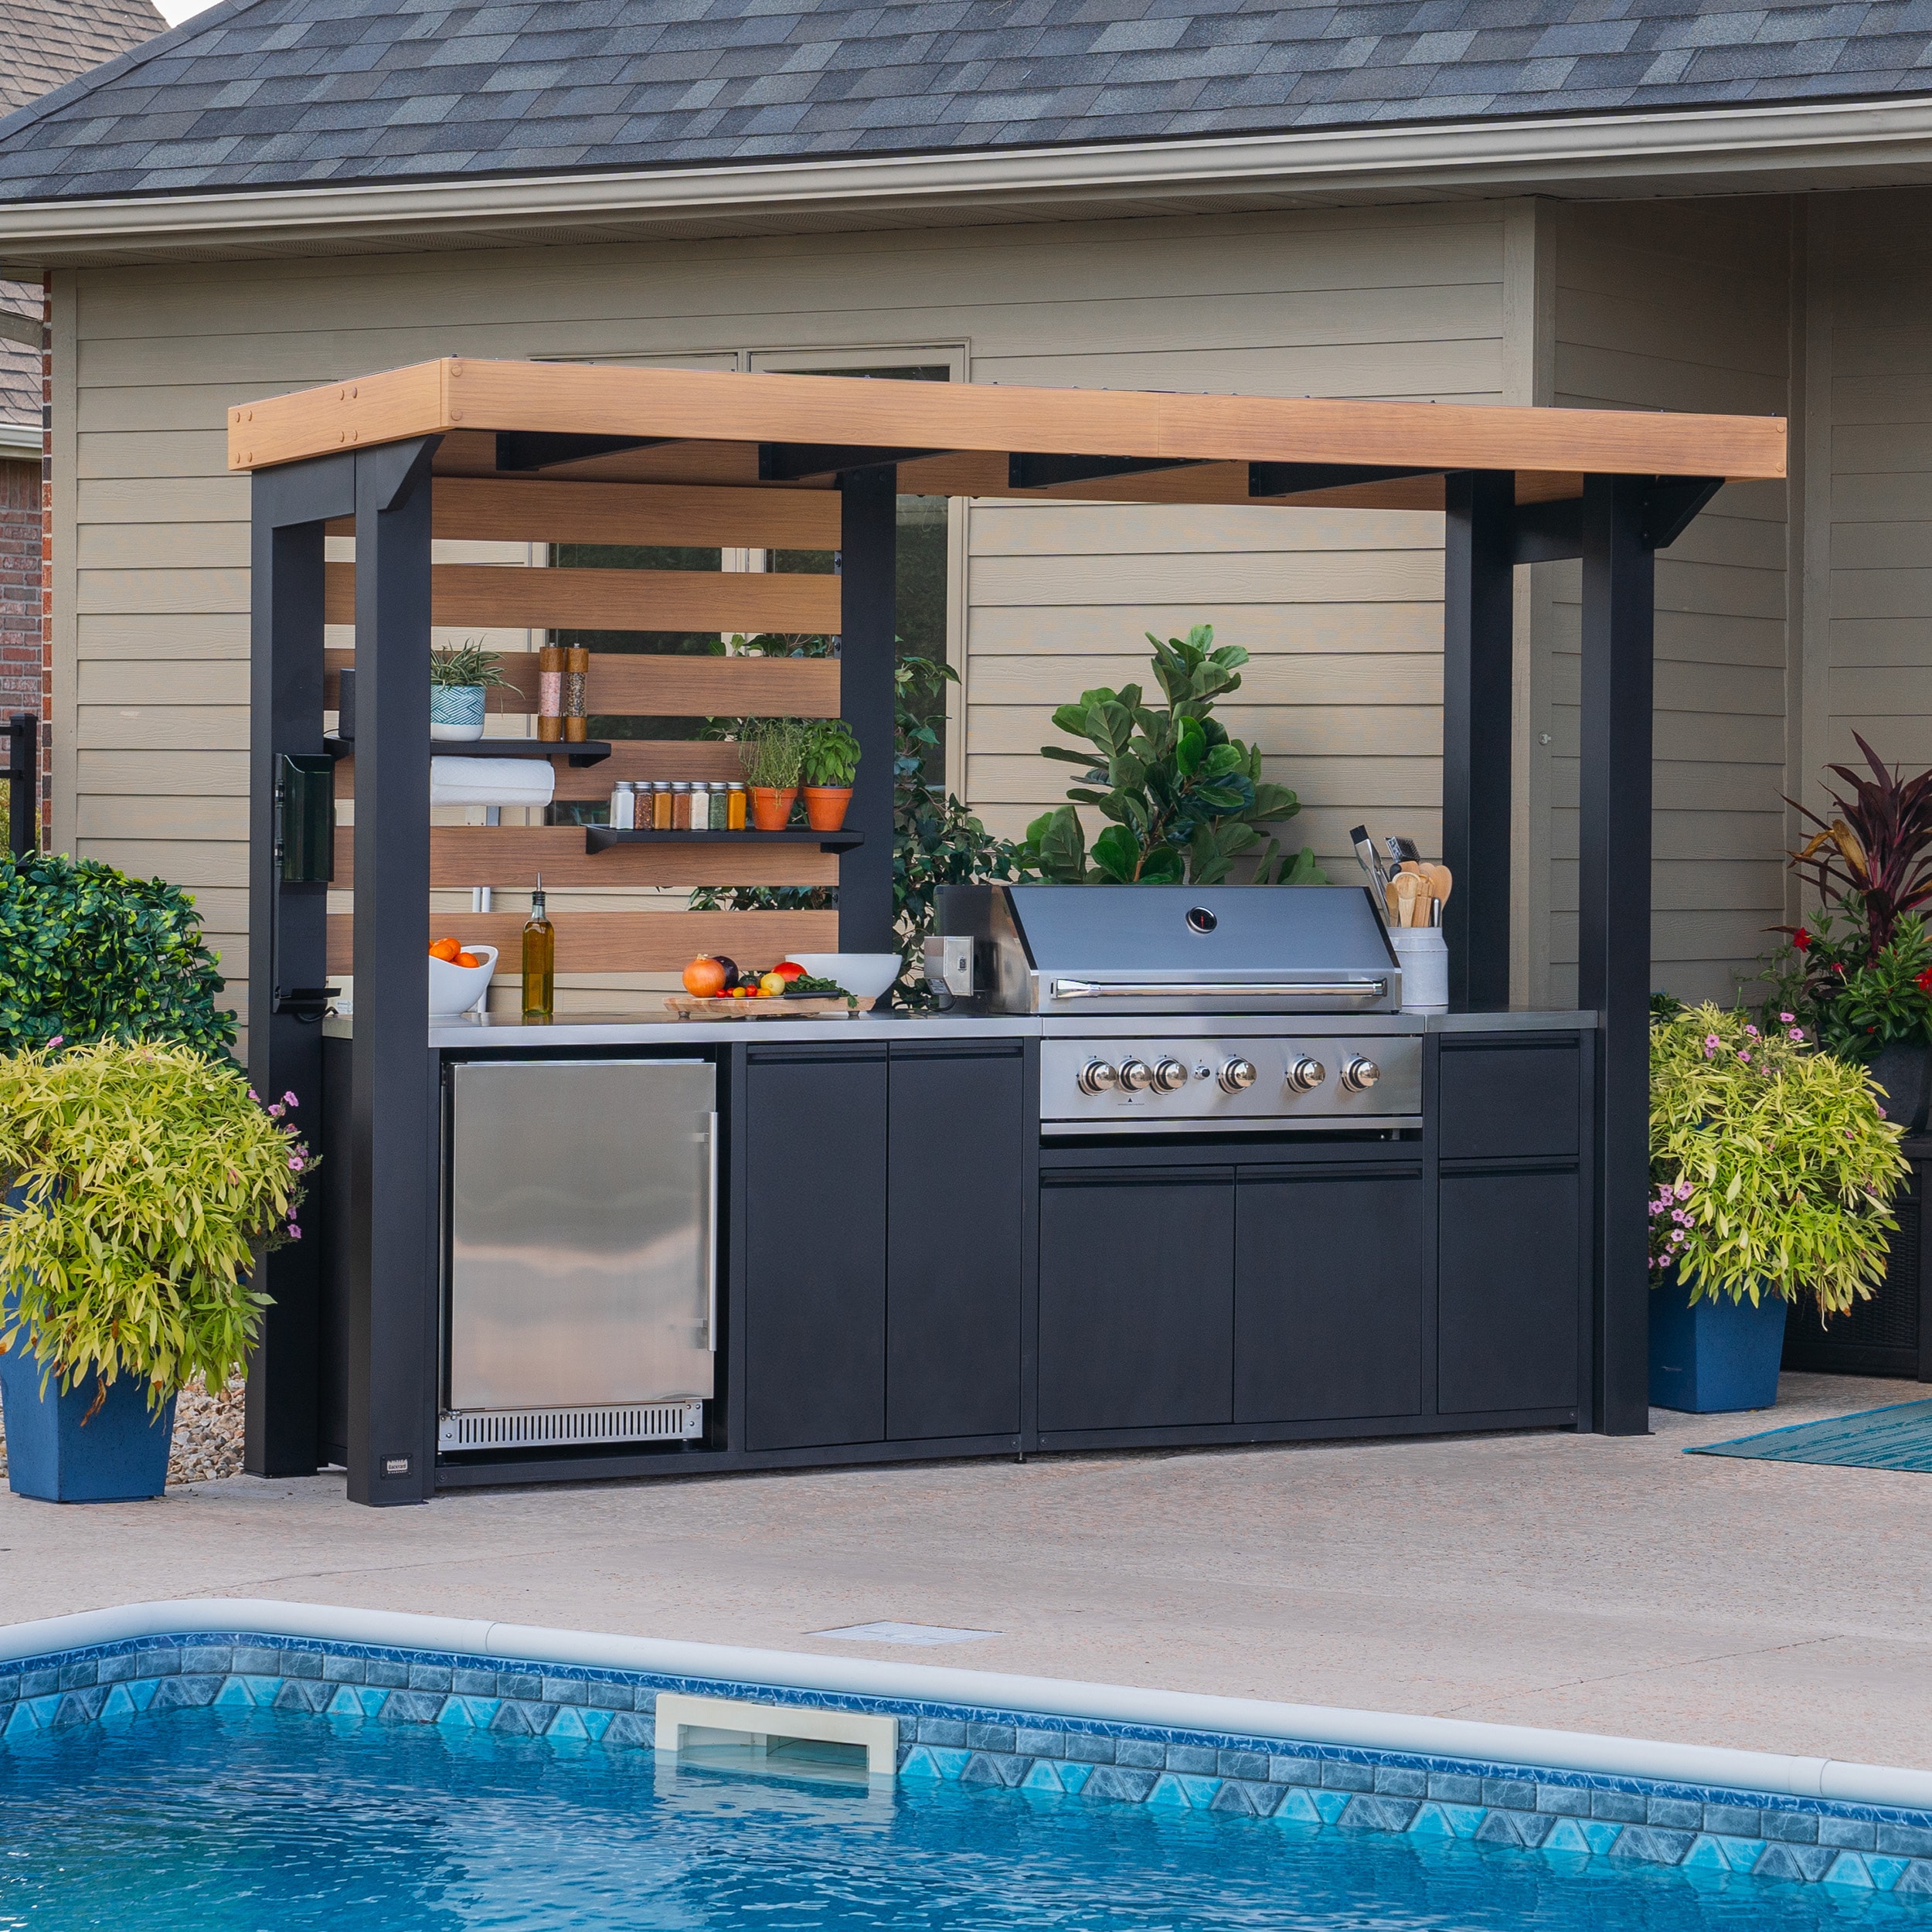 Backyard Discovery Modular Outdoor Kitchens at Lowes.com